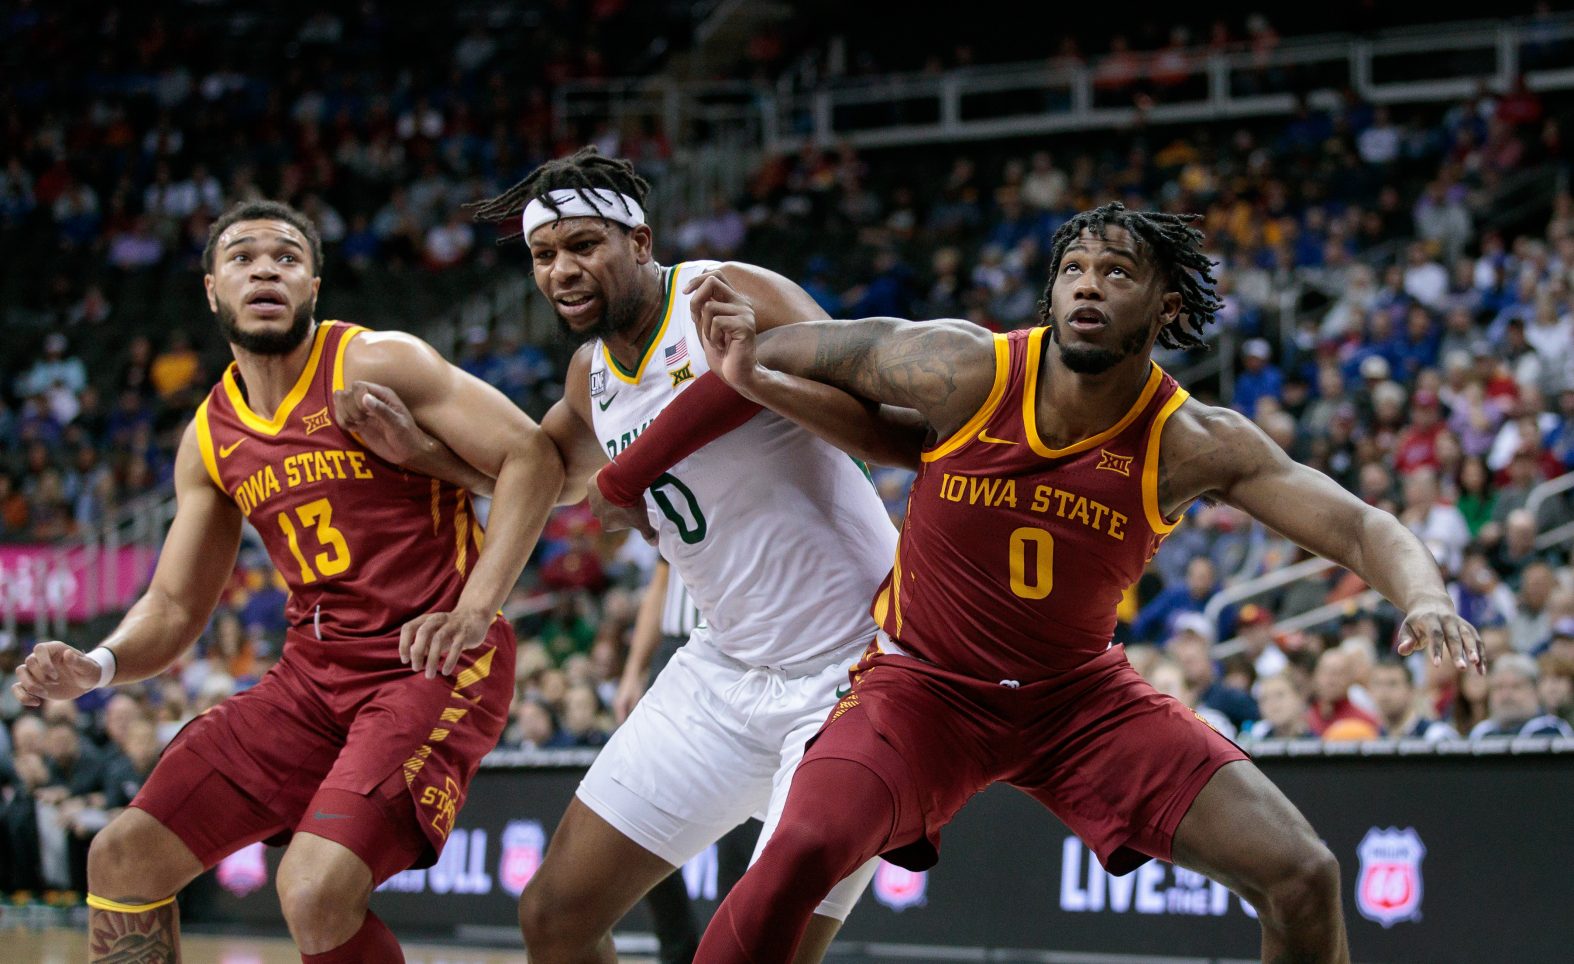 Two Guys Named Chris: Recapping Iowa and Iowa State’s Thursday conference tourney games